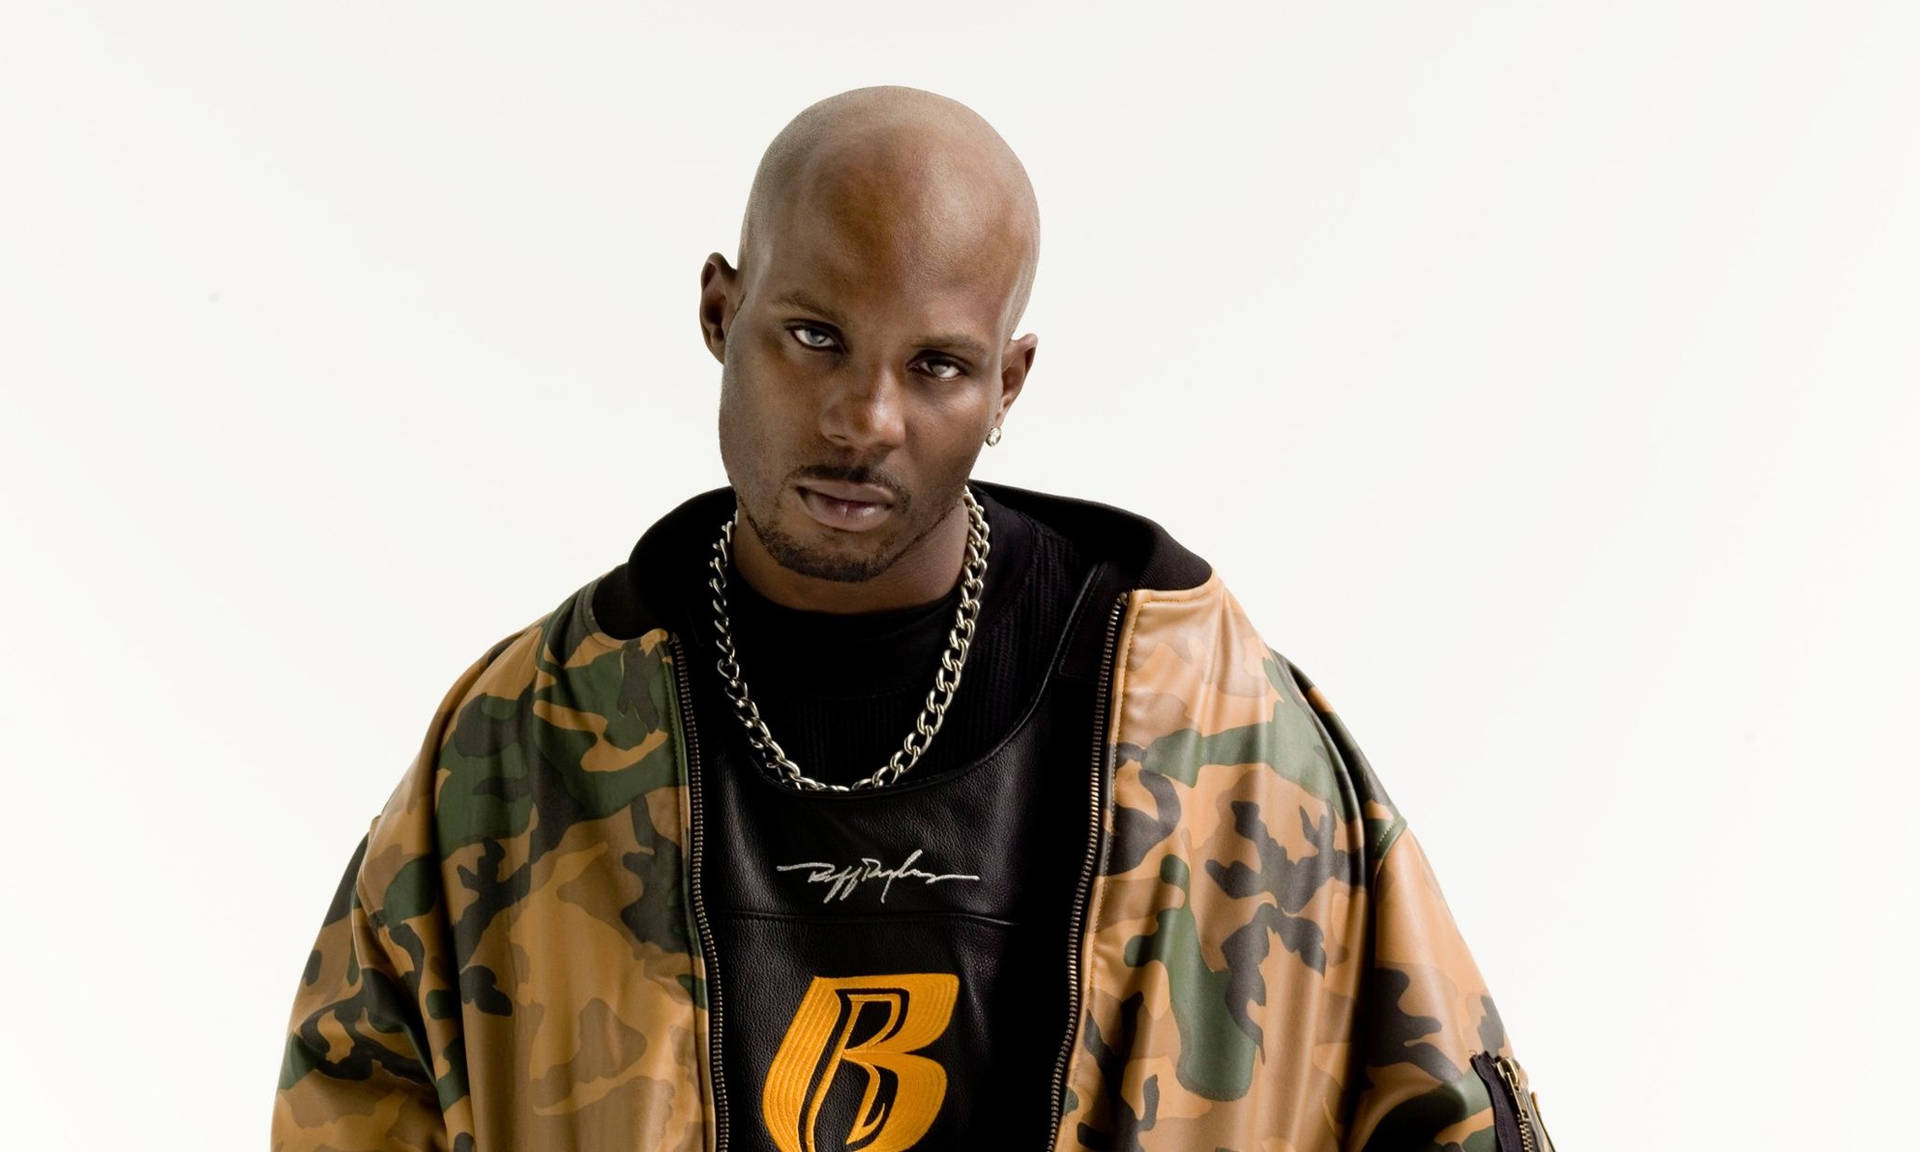 Dmx 2060X1236 Wallpaper and Background Image